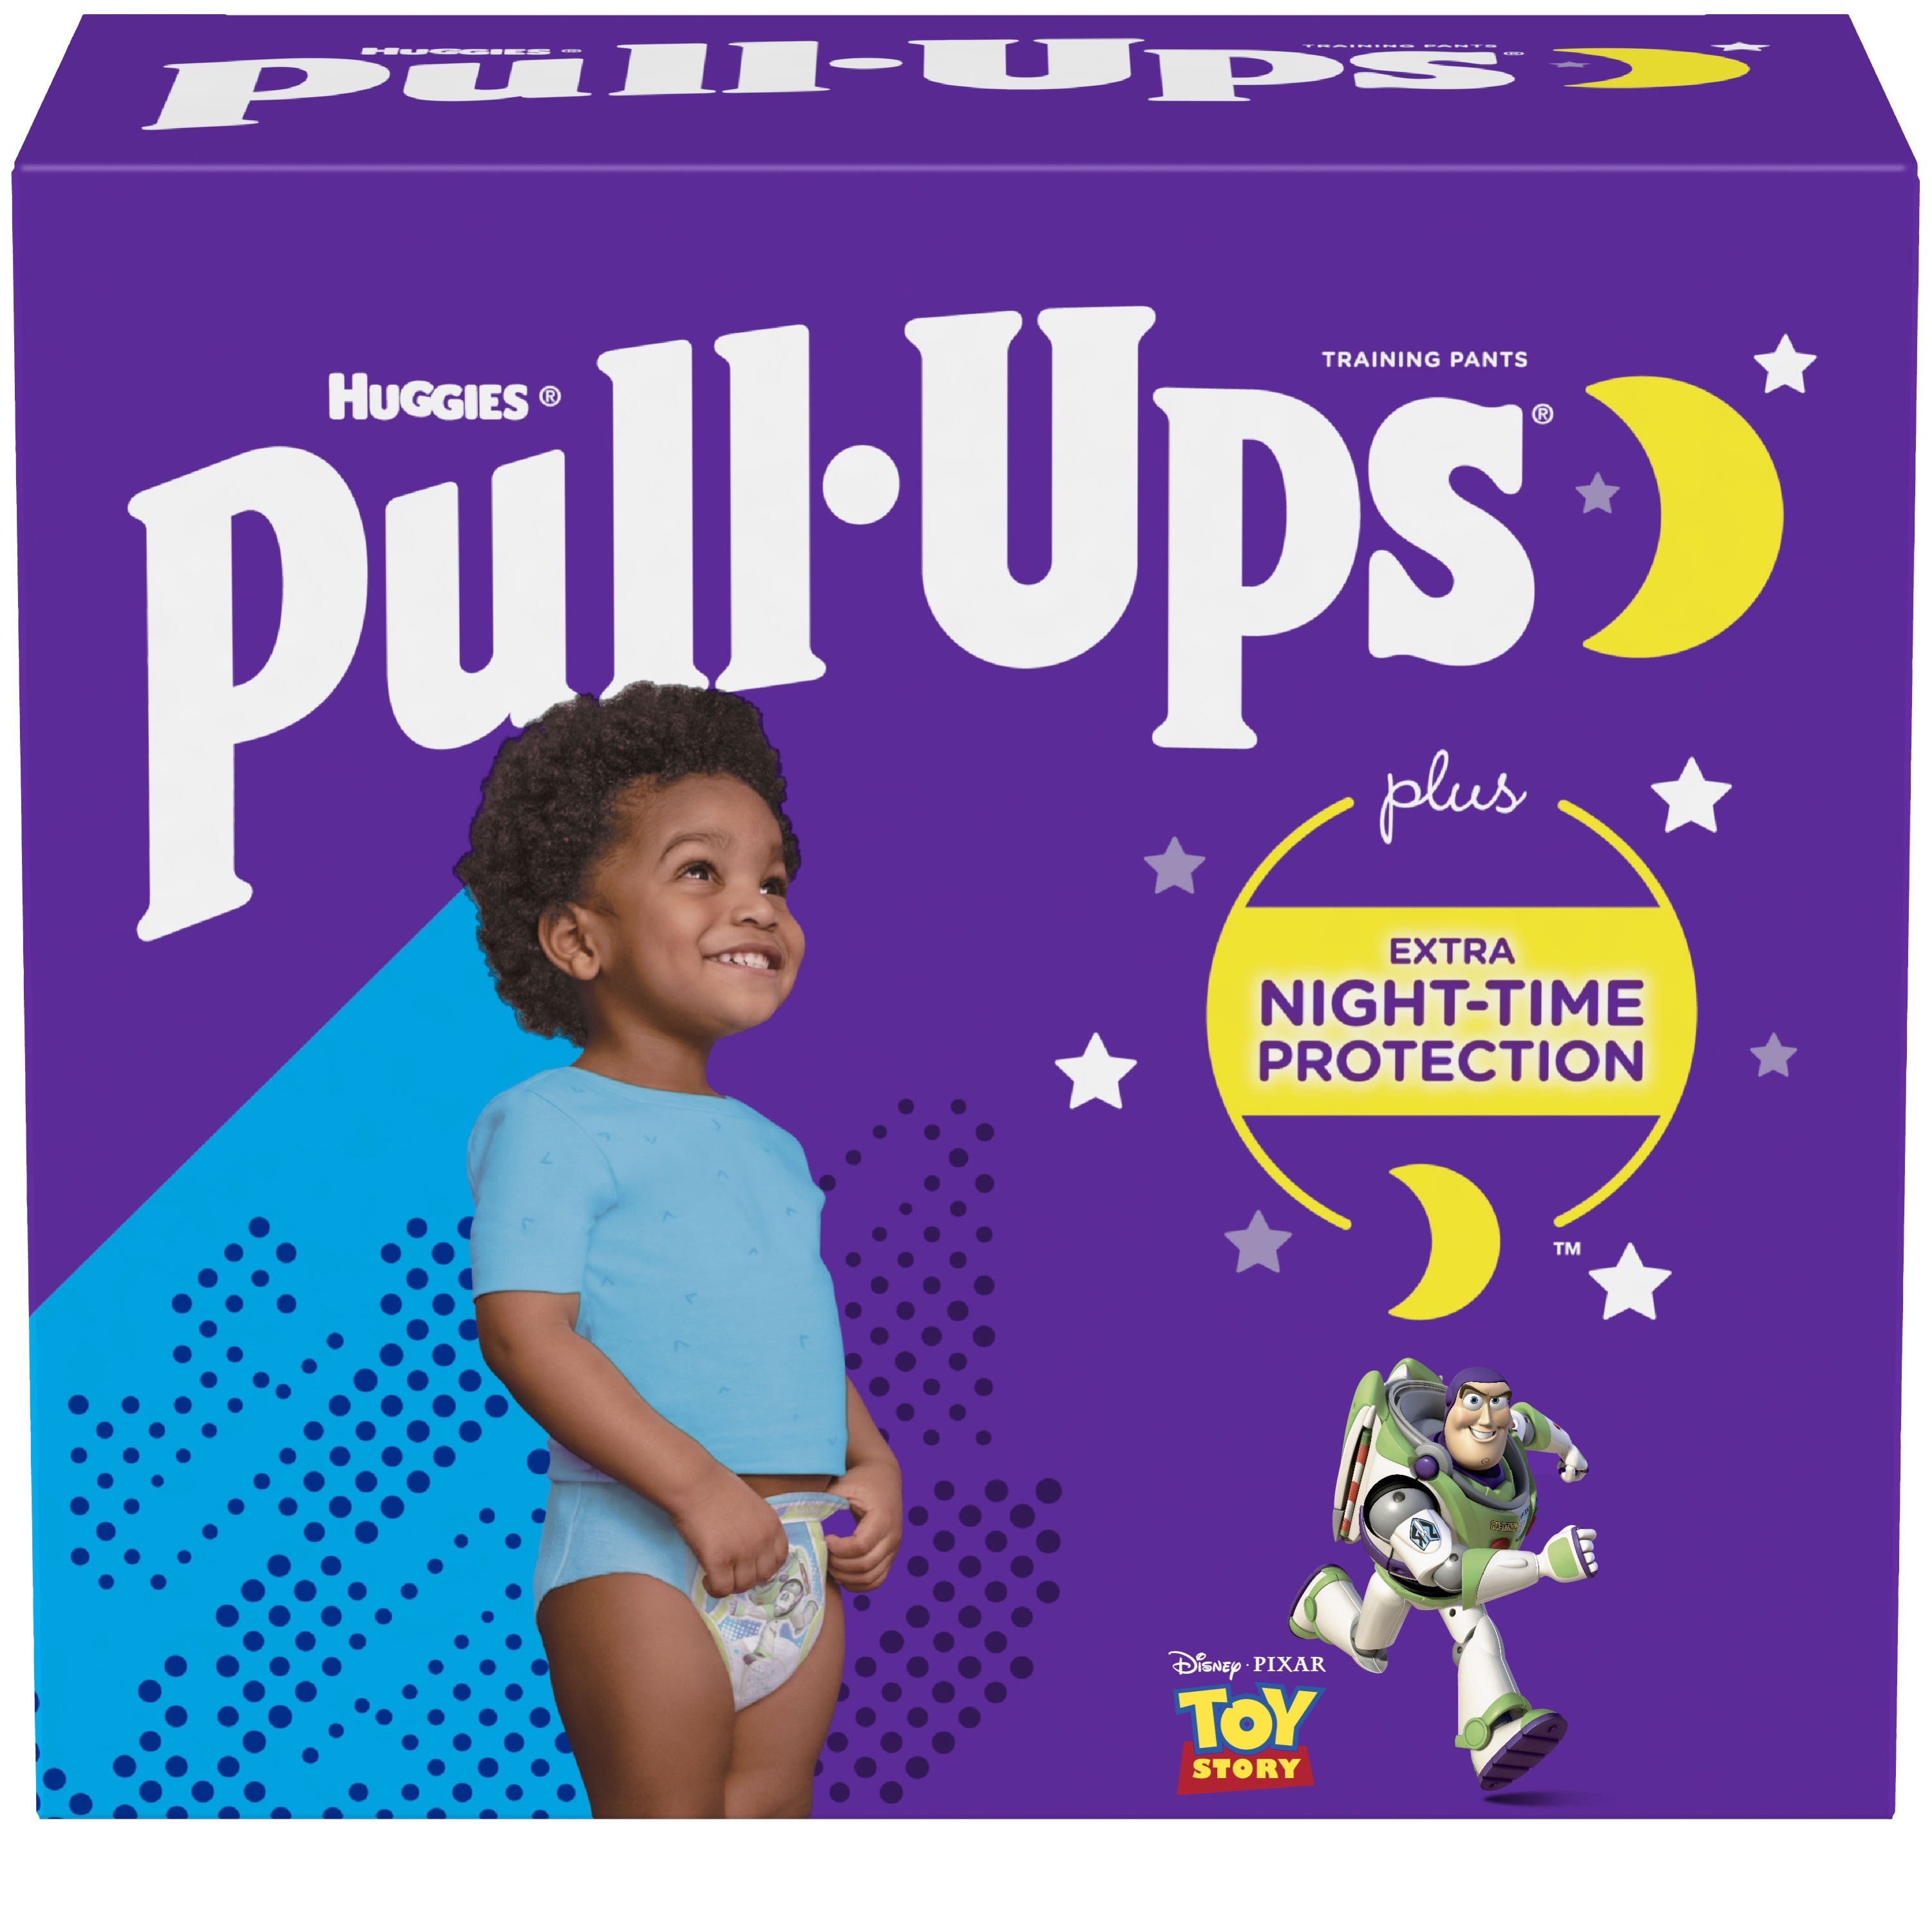 Huggies® Pull-Ups® Night*Time Training Pants for Girls/Boys (Girl's and  Boy's Sizes: 2T-3T, 3T-4T)